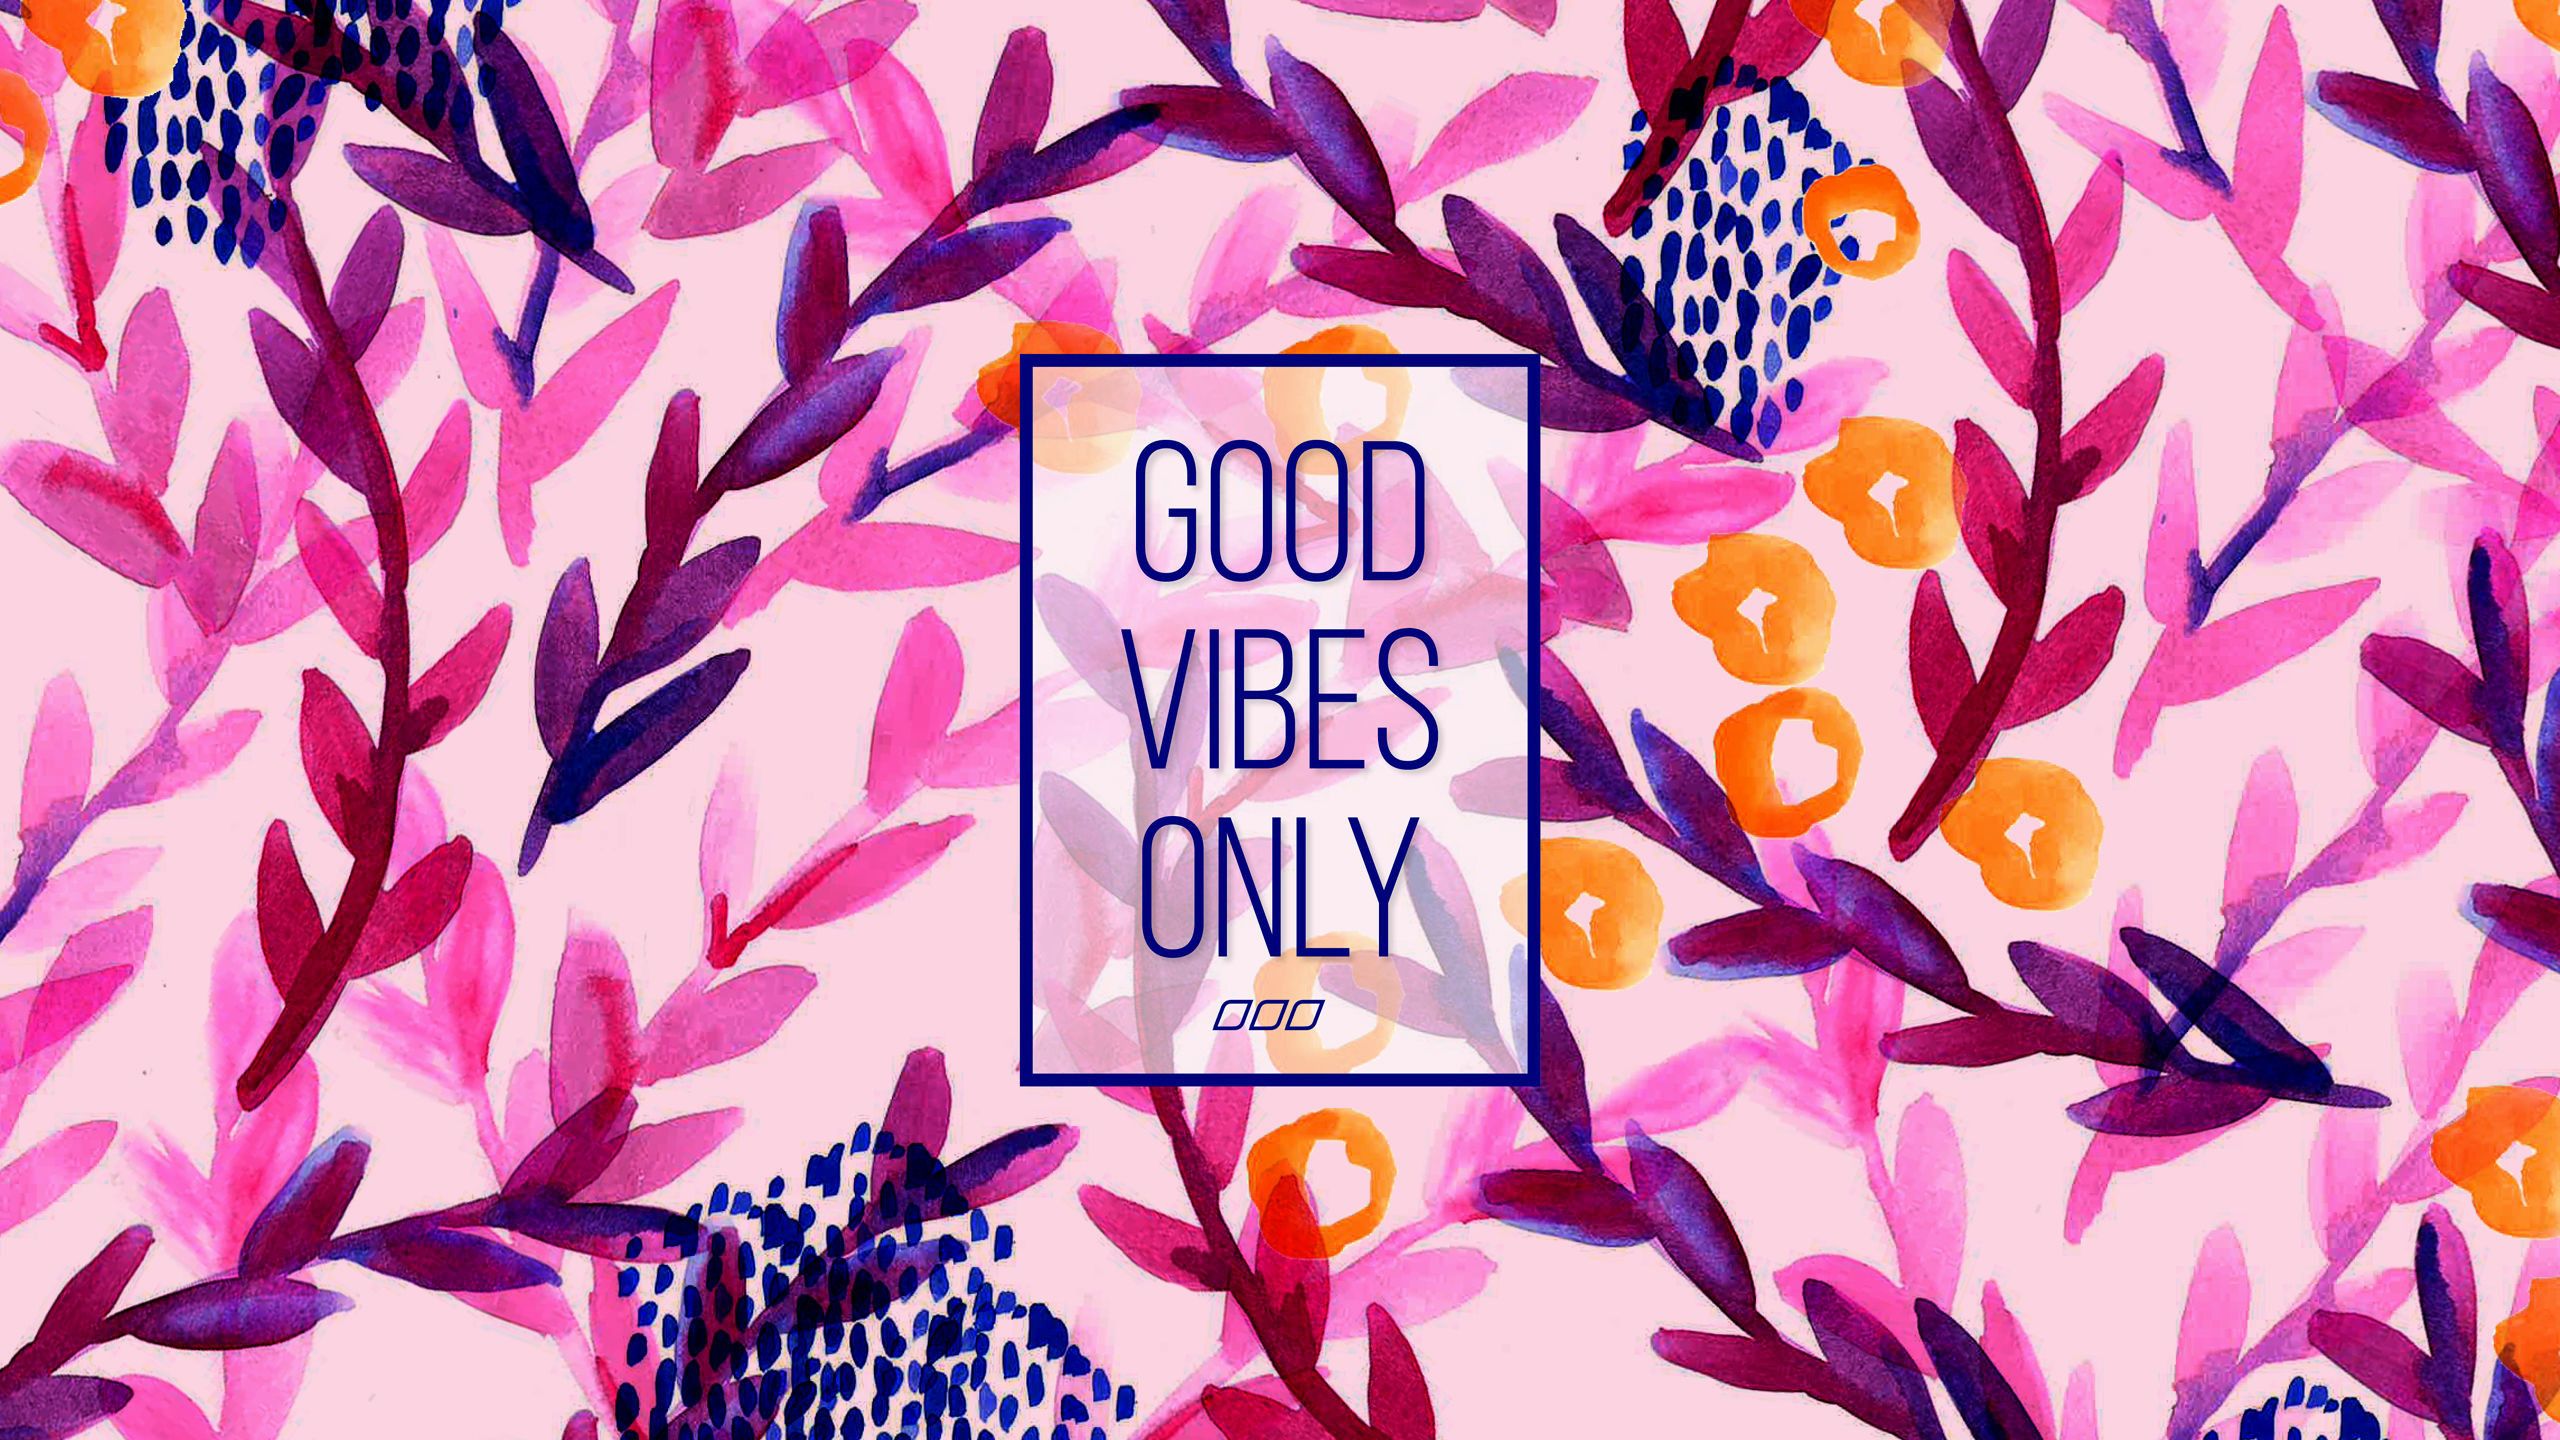 Good Vibes Only Wallpaper Laptop, Download Wallpaper on Jakpost